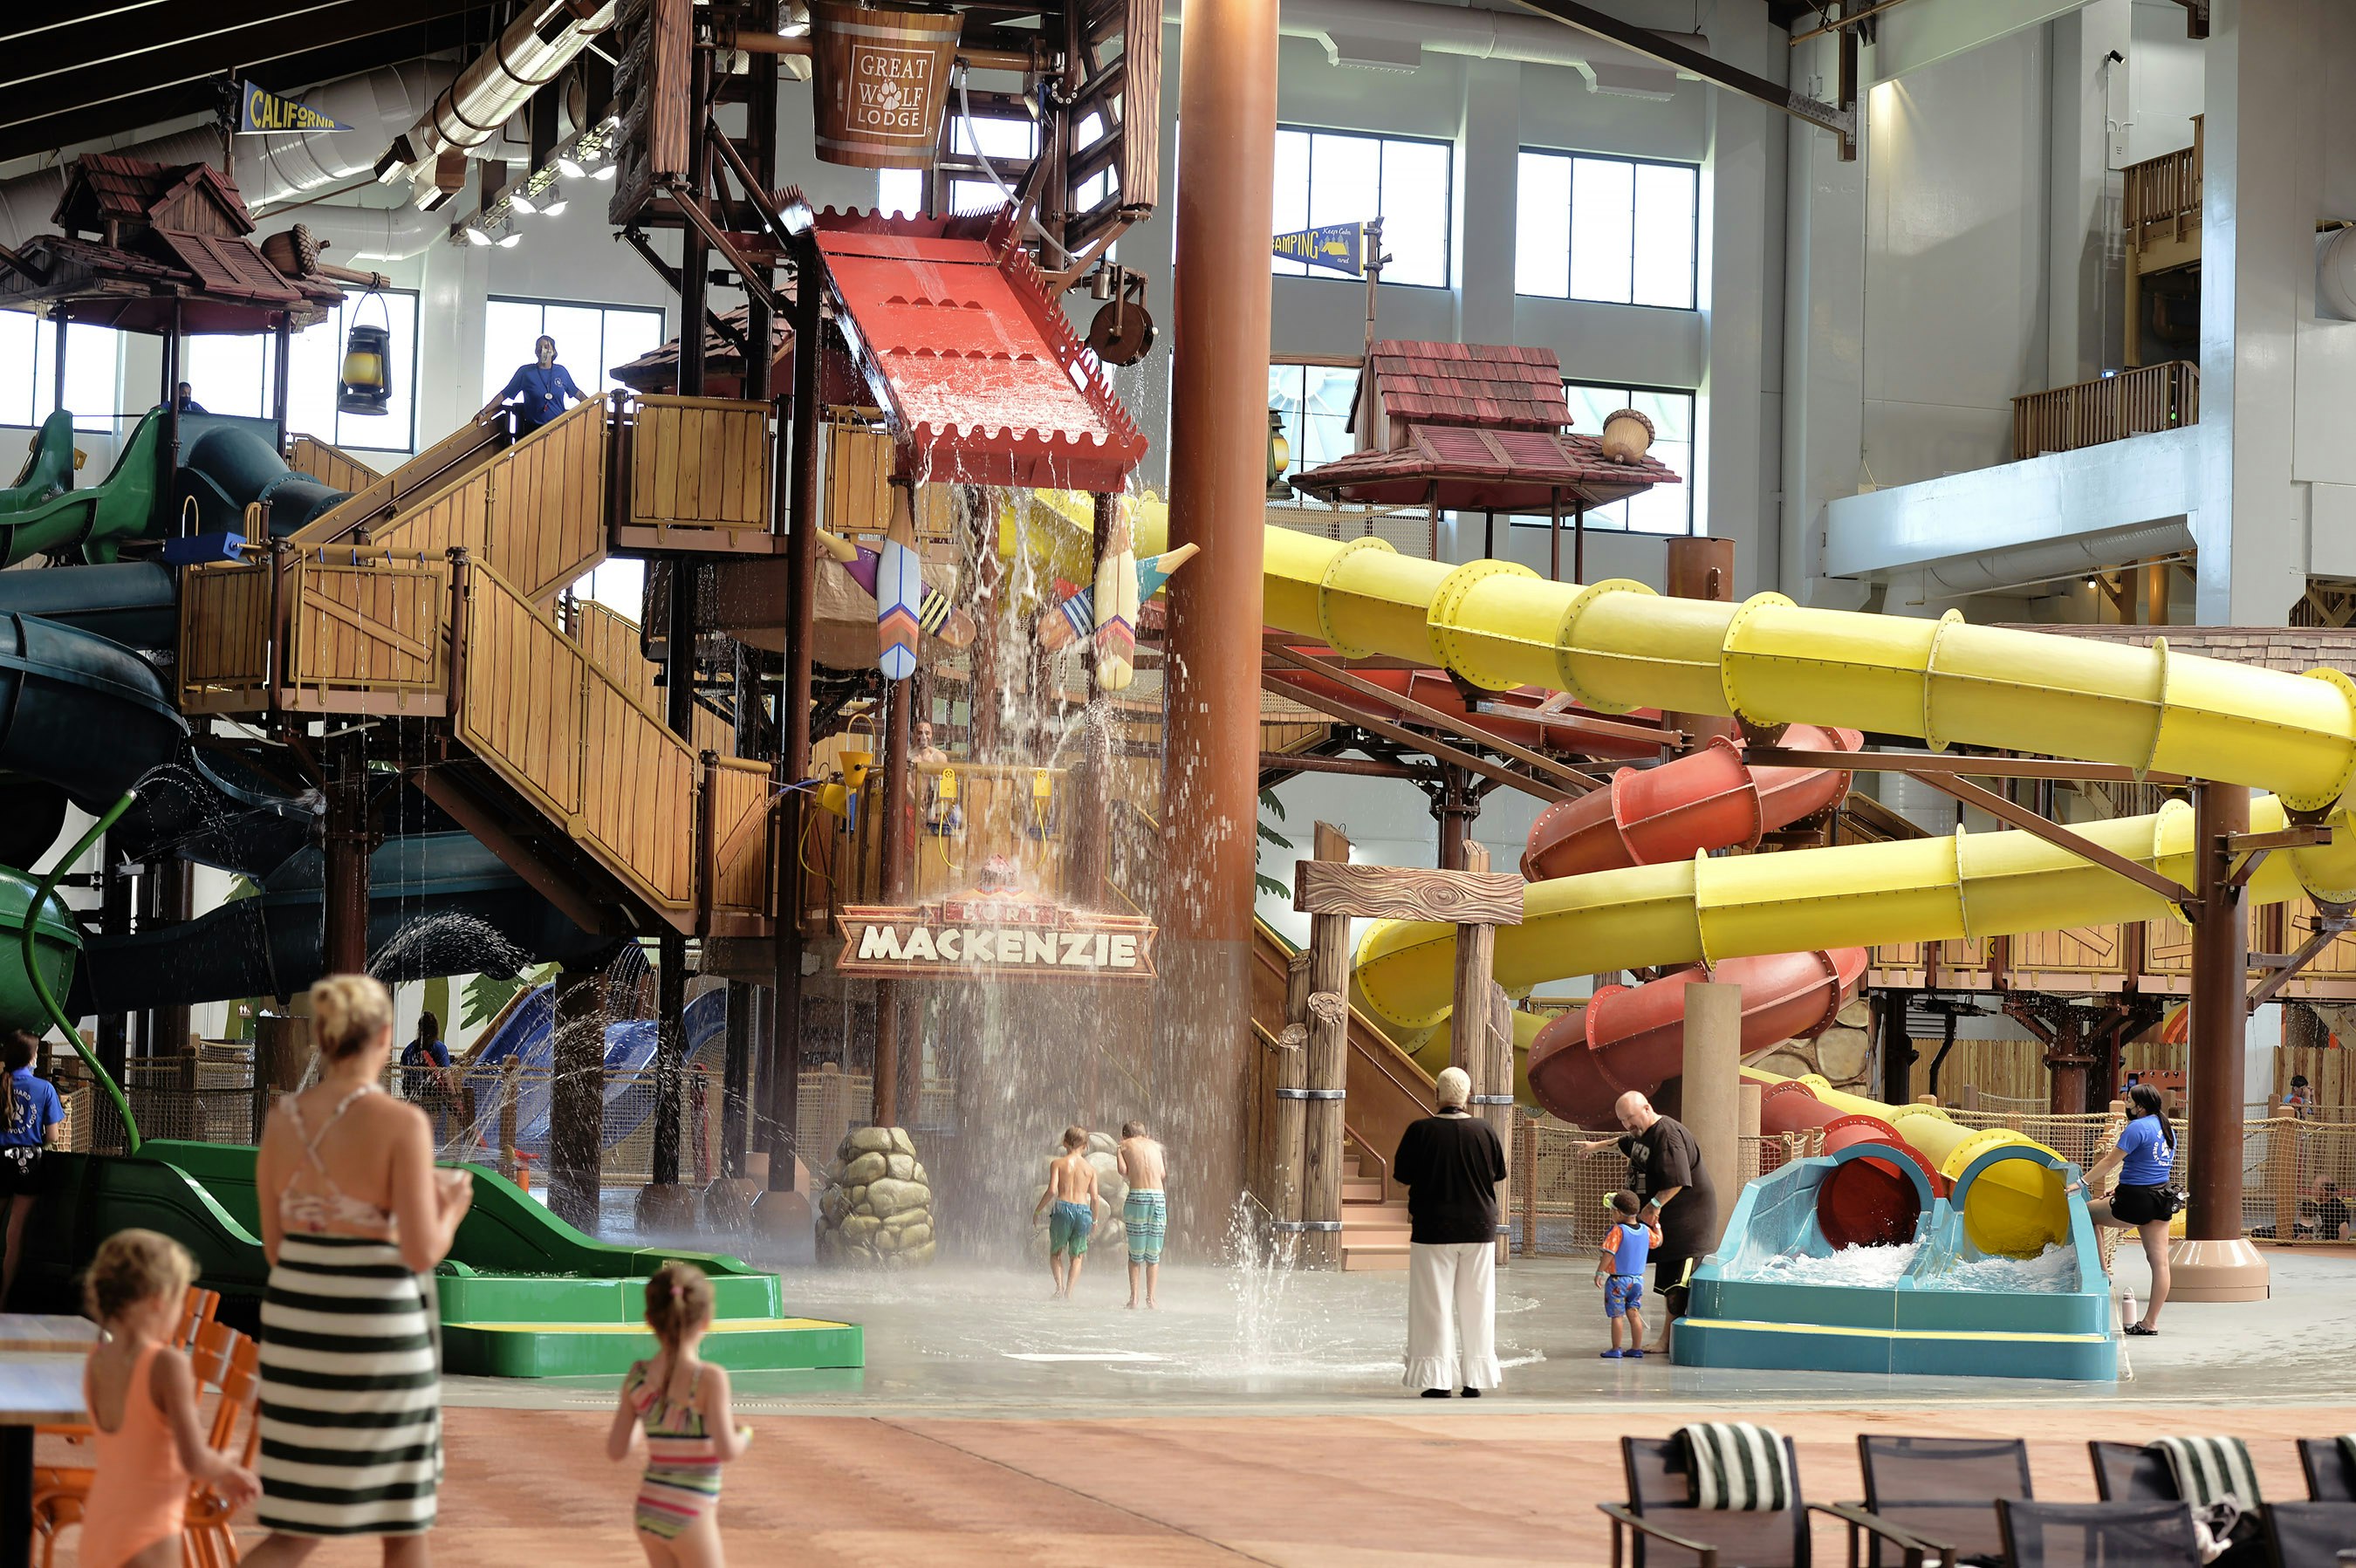 An indoor water park. You can see flumes and step and water coming out of a bucket